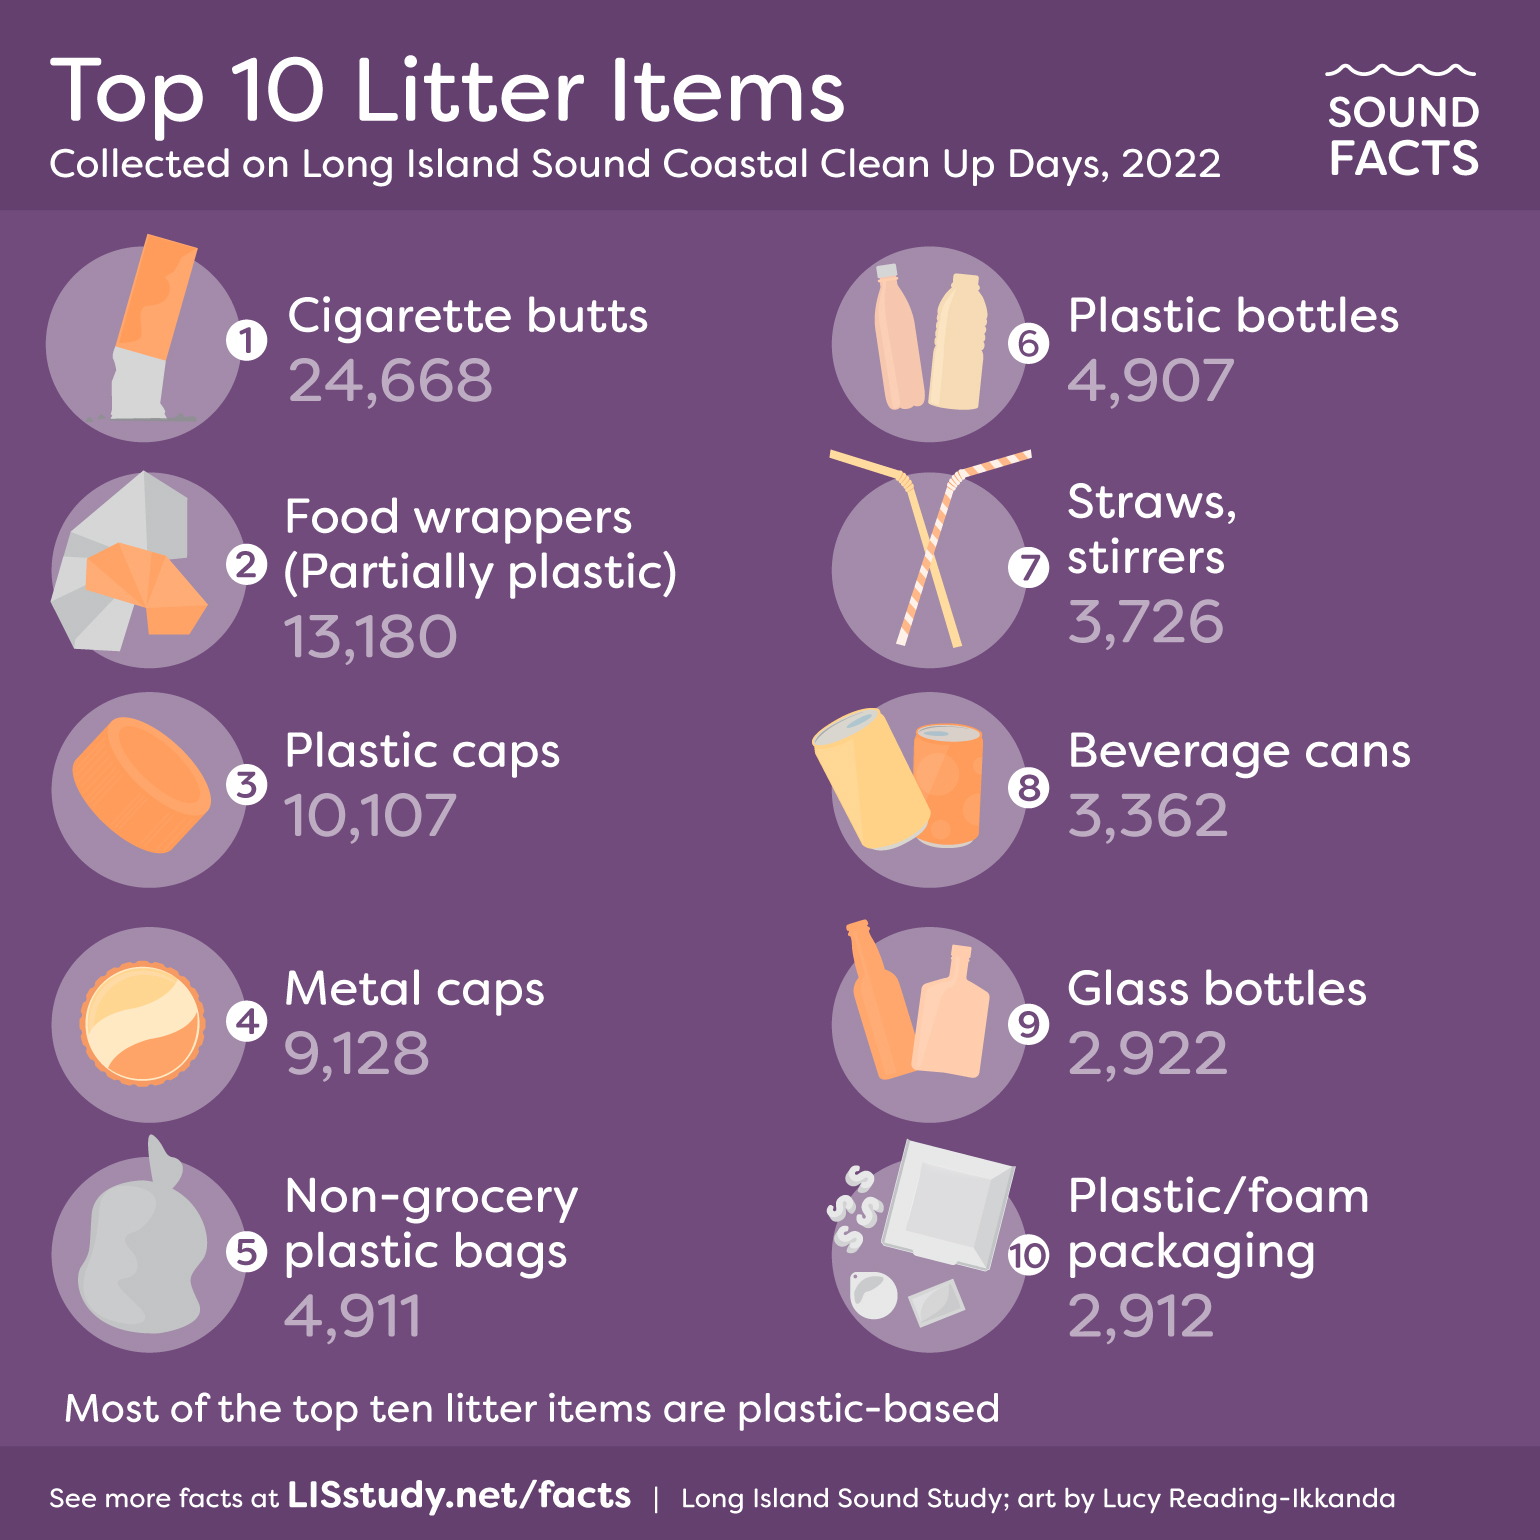 Graphic showing the top 10 litter items in Long Island Sound as collected by volunteers in New York and Connecticut. Number 1 is cigarette butts, followed by food wrappers, plastic caps, metal caps, non grocery plastic bags, plastic bags, straws and stirrers, beverage cans, glass bottles, and plastic and foam packaging